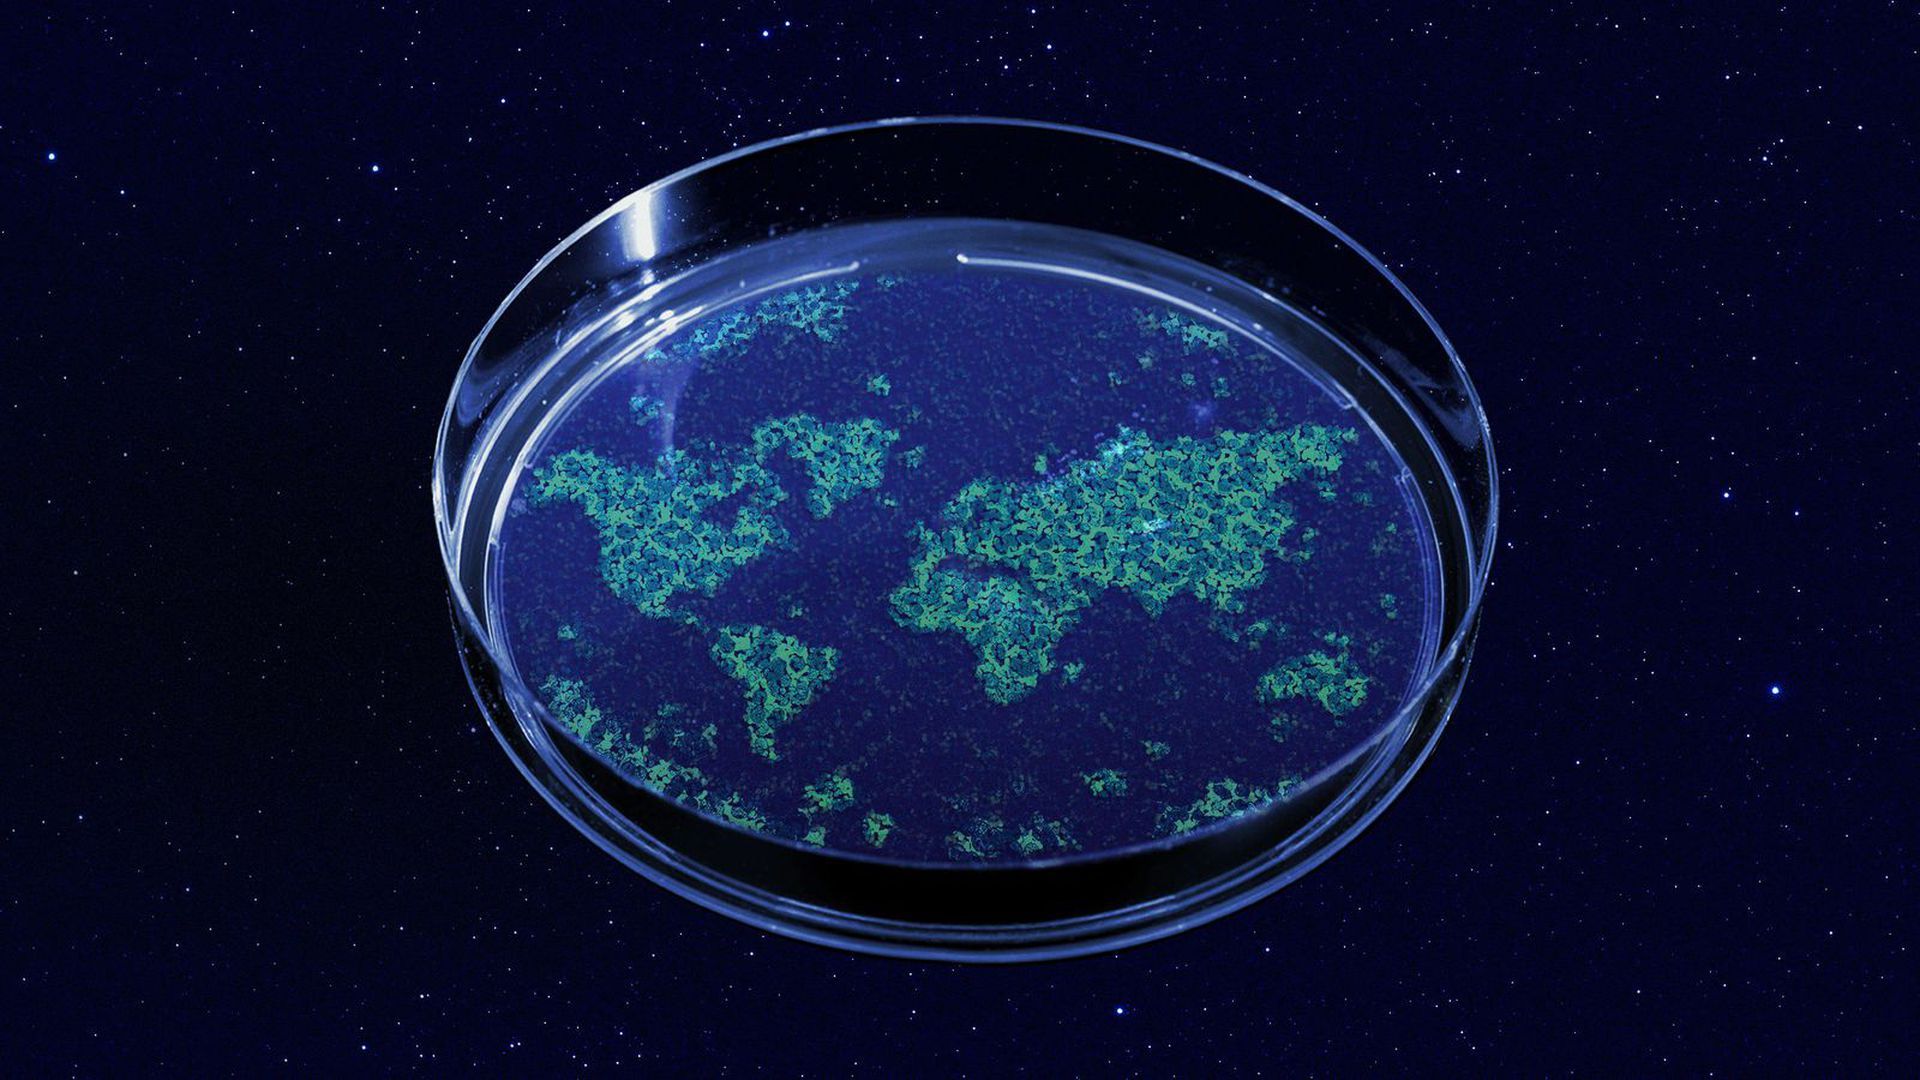 A rendering of the Earth as a giant petri dish.